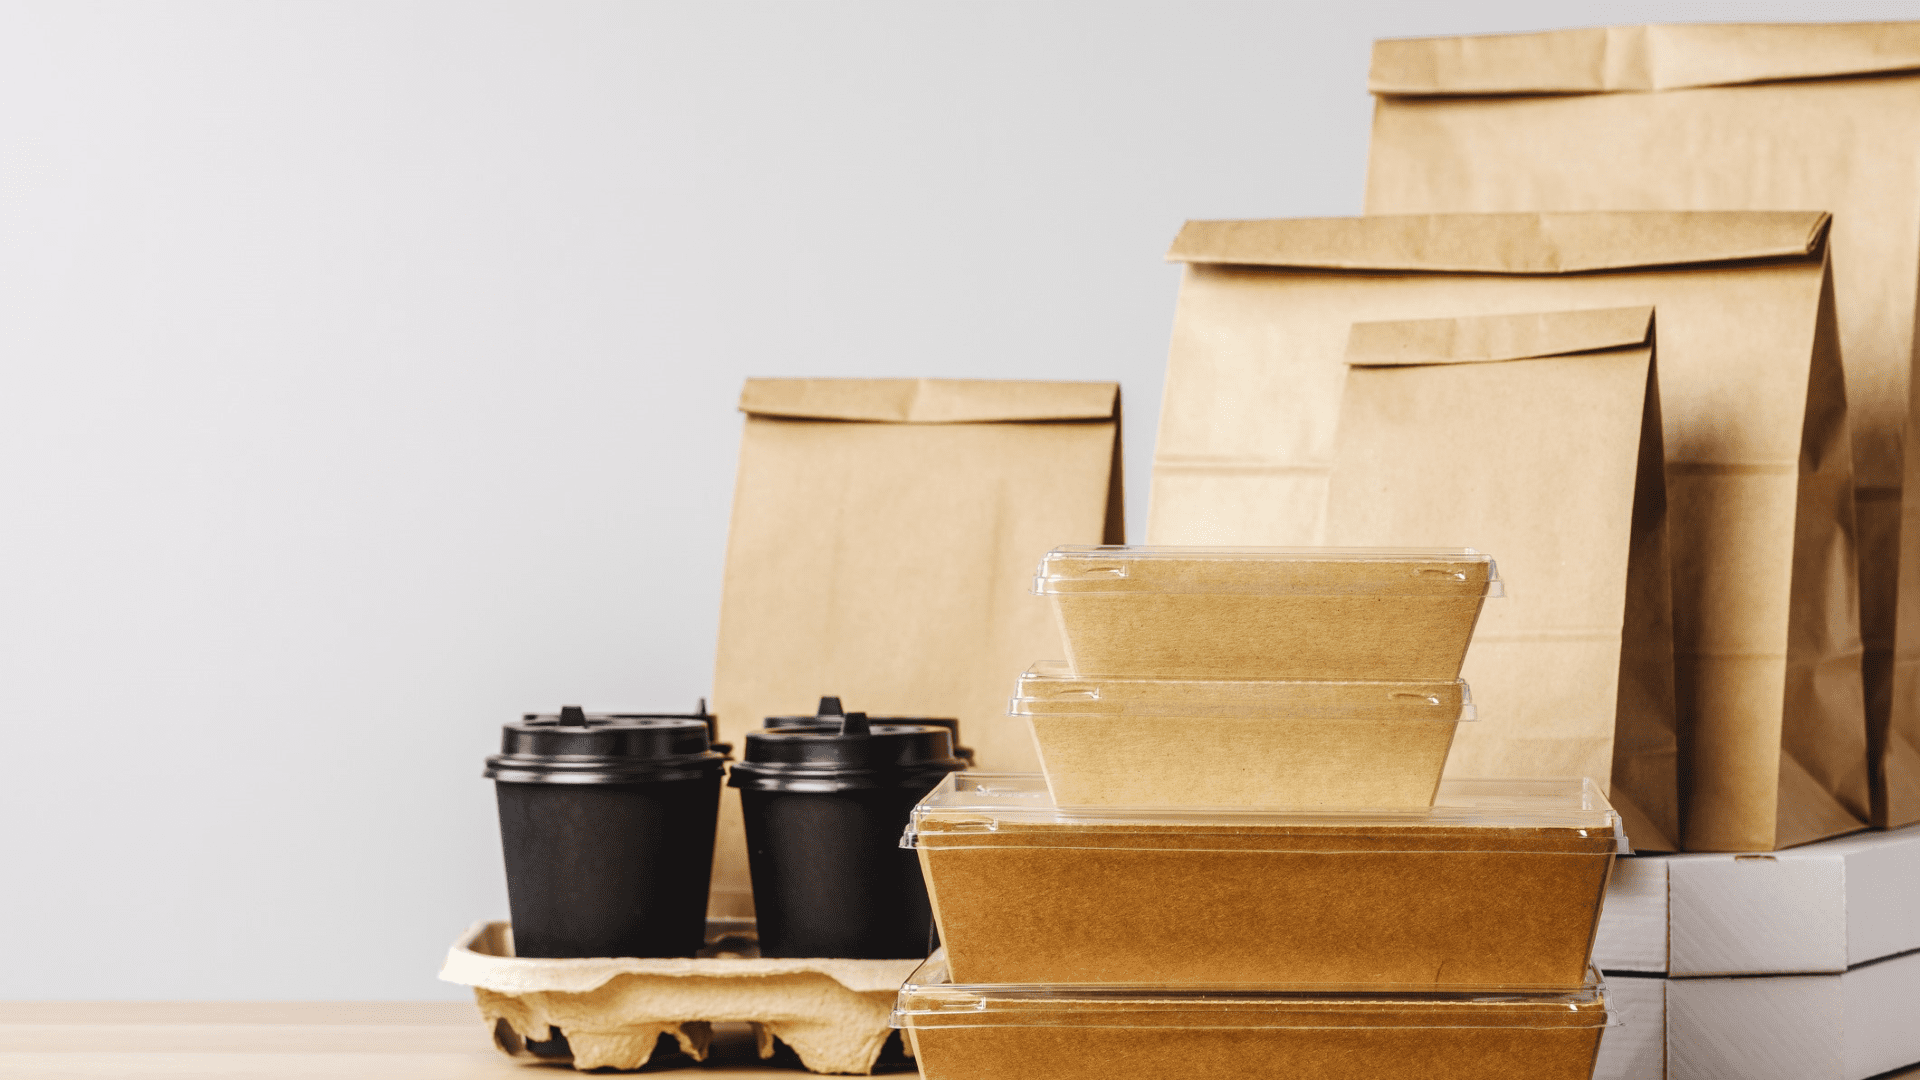 PFAS to Go: Many takeout containers and wrappers risk contaminating foods